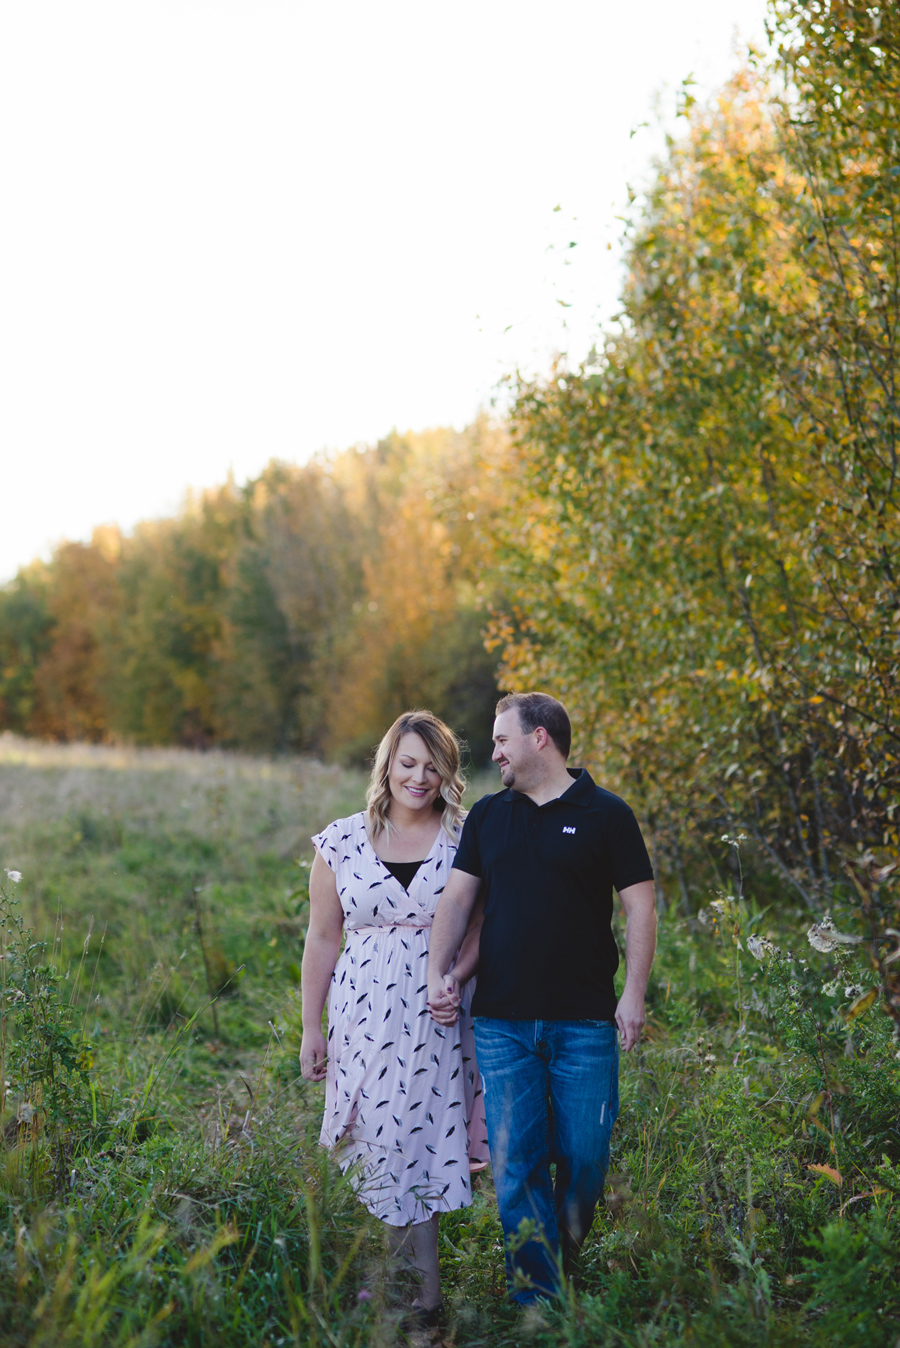 bbcollective_yeg_2016_marilynandian_engagement_photography001.jpg